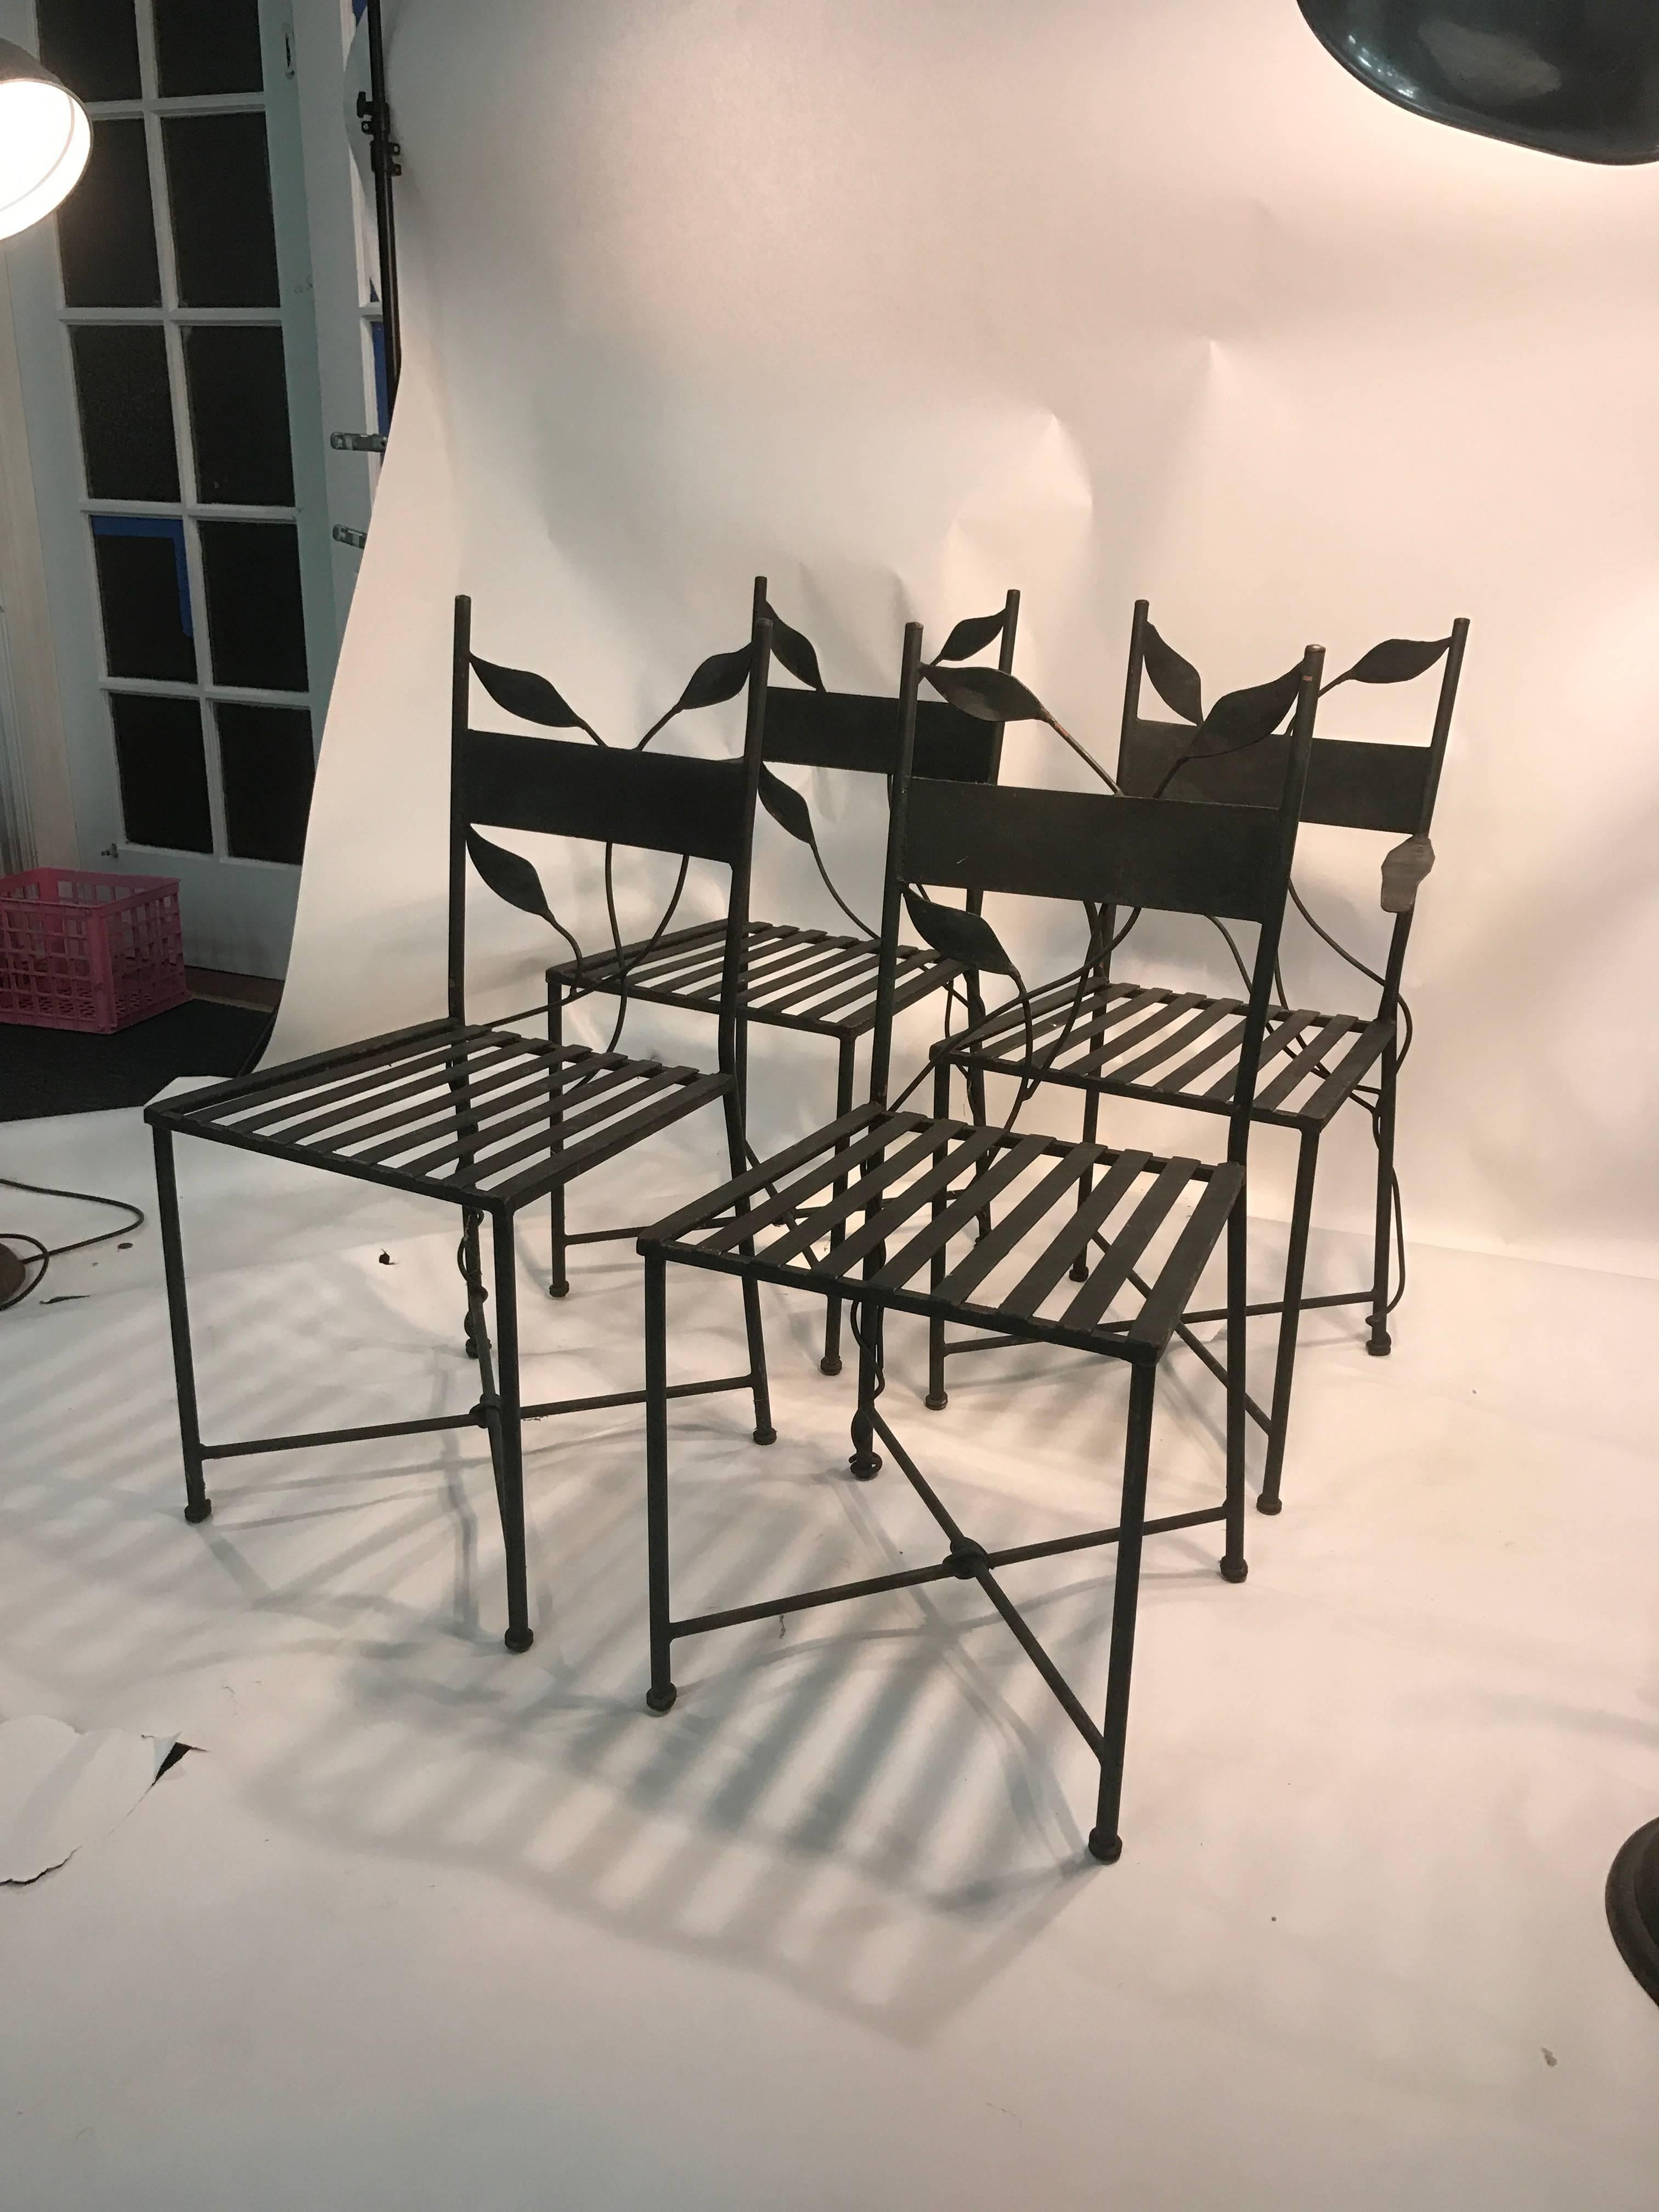 An outstanding set of four iron outdoor garden chairs with X-base and lovely leaf design in the manner of Claude Lalanne, circa 1970. Good vintage condition with age appropriate wear.
Dimensions: 
First pair: 35.5 H x 19 W x 20 D x 18 S
Second